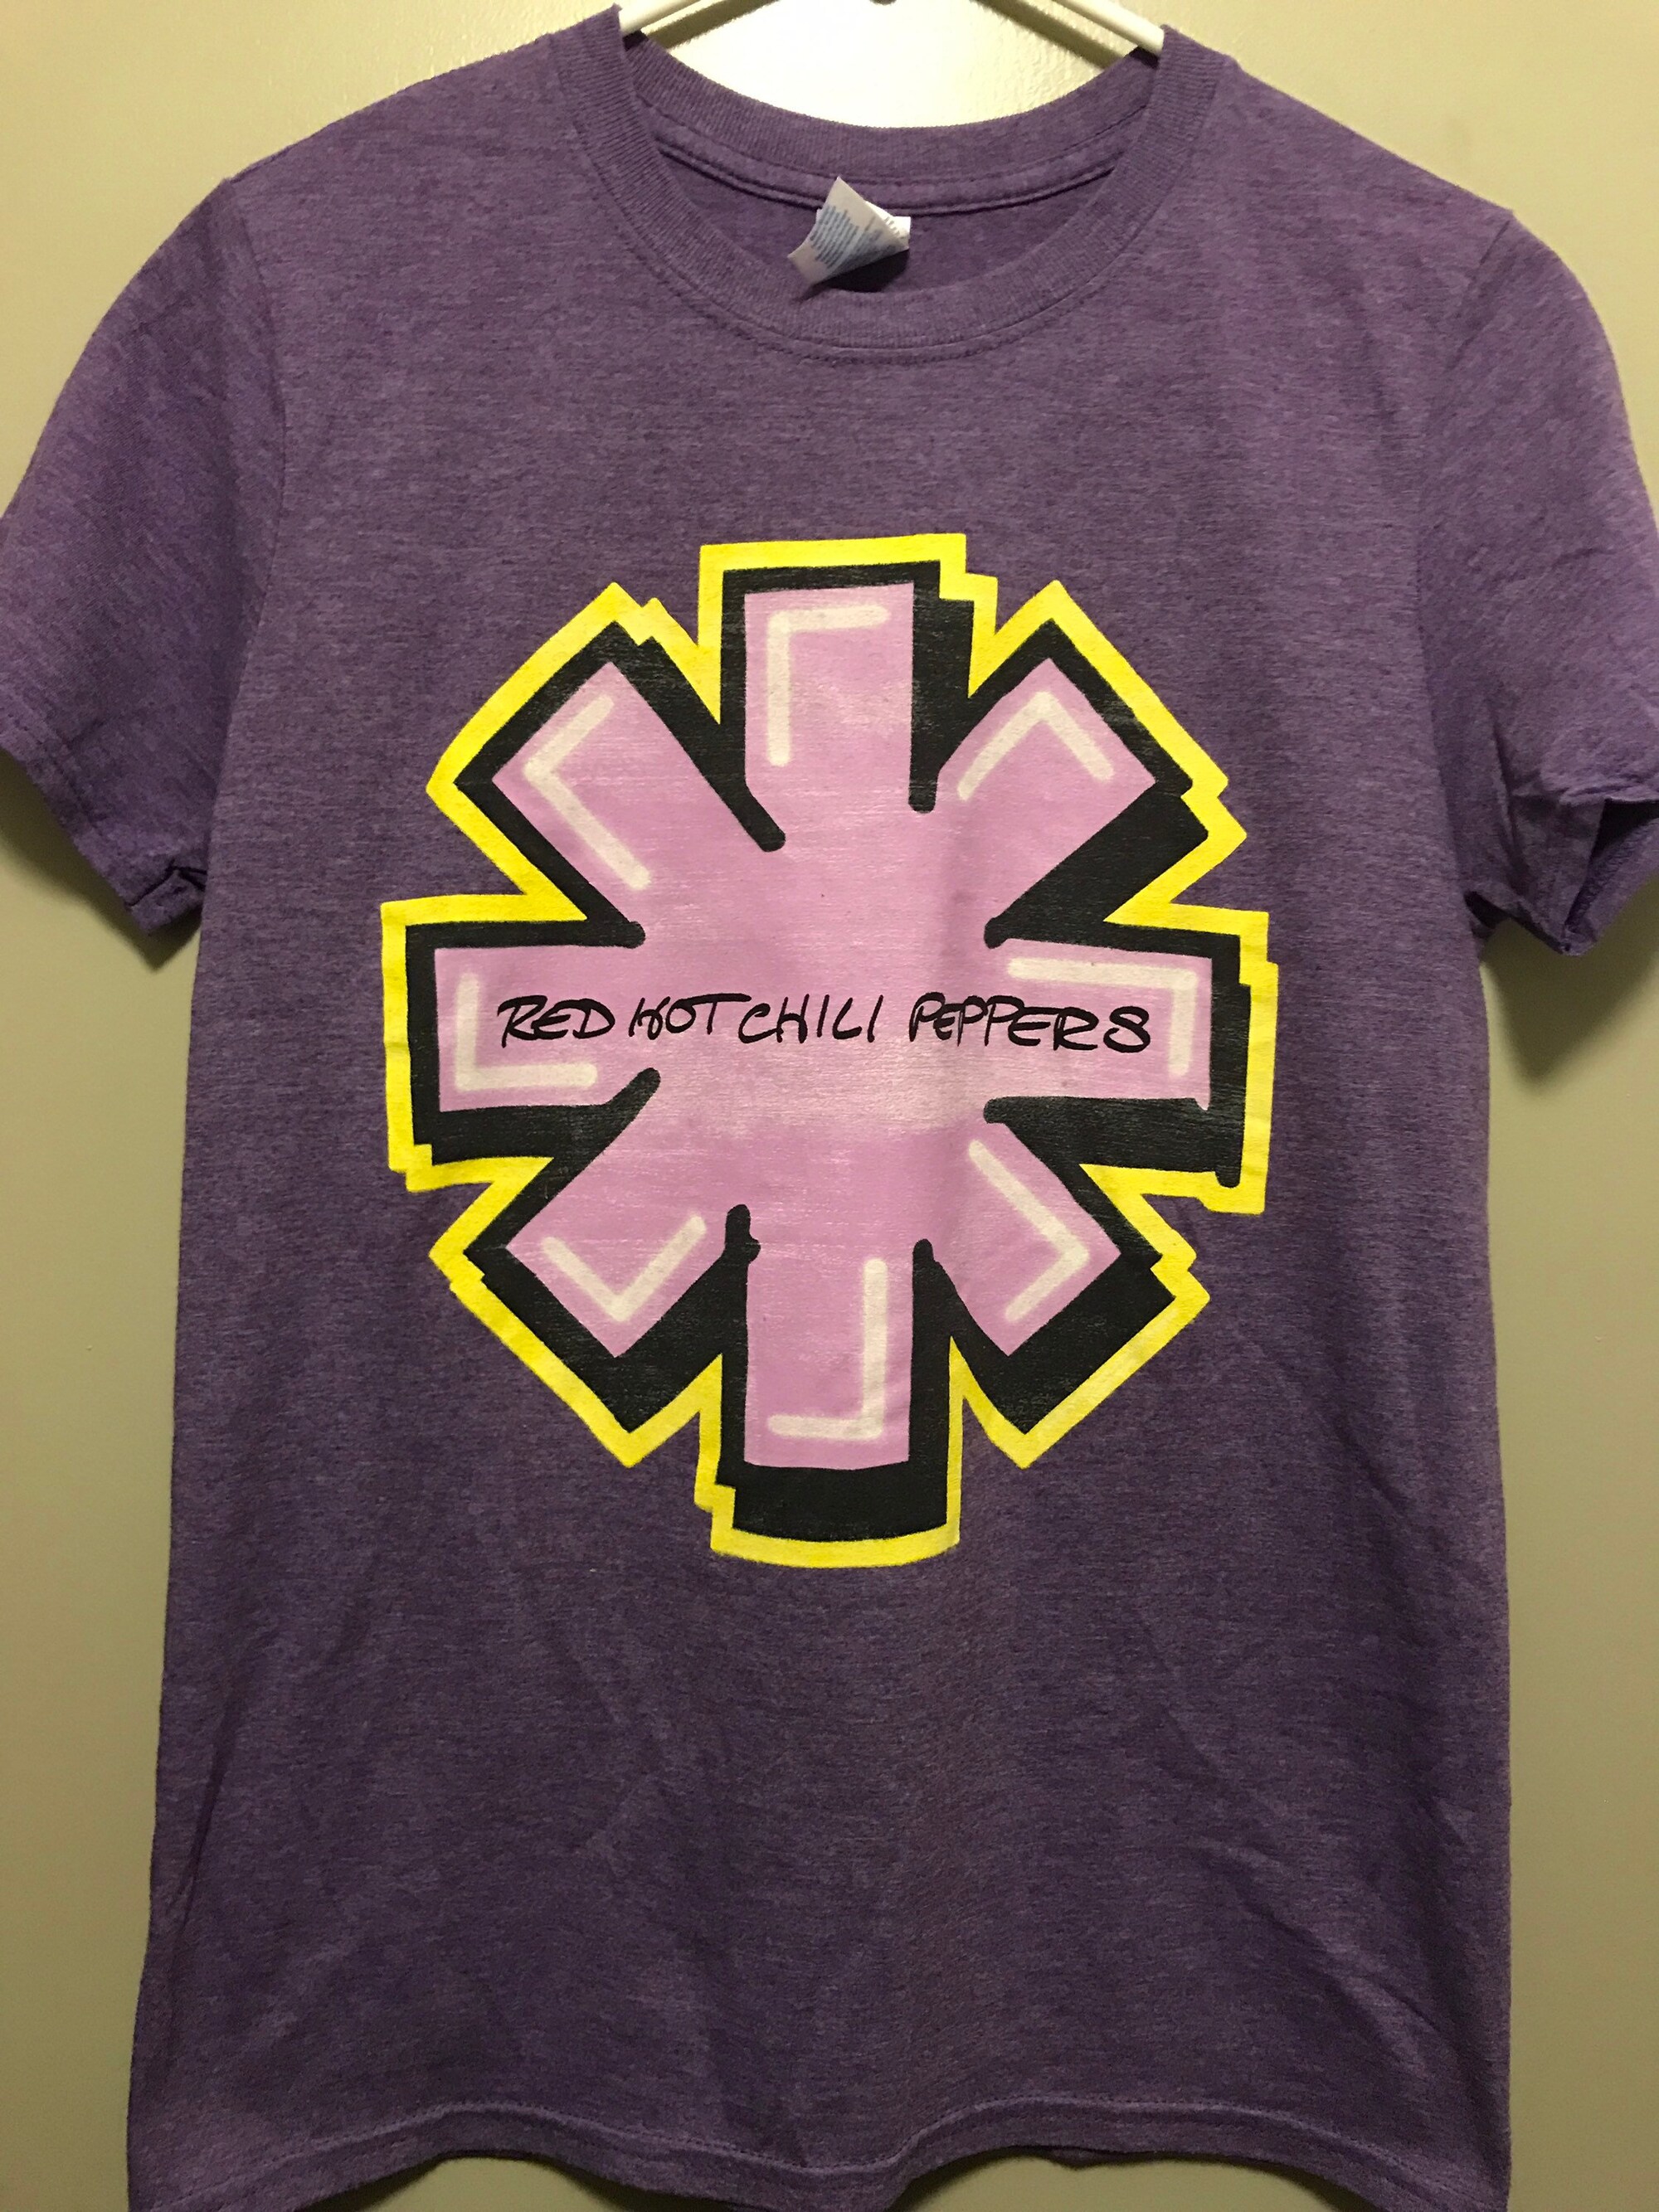 Red Hot Chili Peppers RHCP The Getaway Tour Shirt